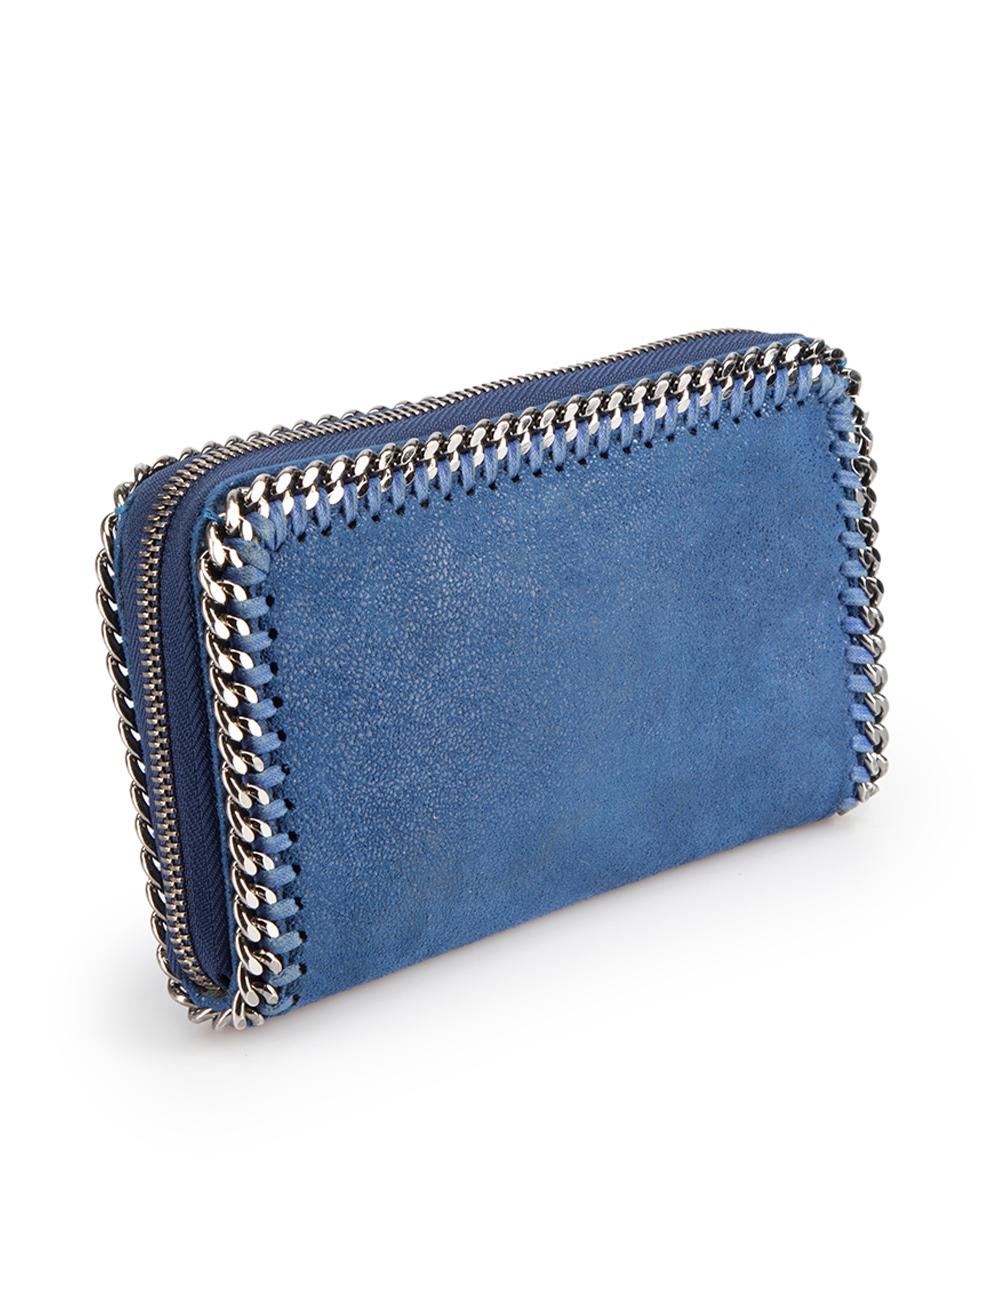 CONDITION is Very good. Minimal wear to purse is evident. Minimal wear to the side and the whipstitch edges with scuff marks on this used Stella McCartney designer resale item.



Details


Blue

Vegan suede

Wallet

Whipstitch chain edge